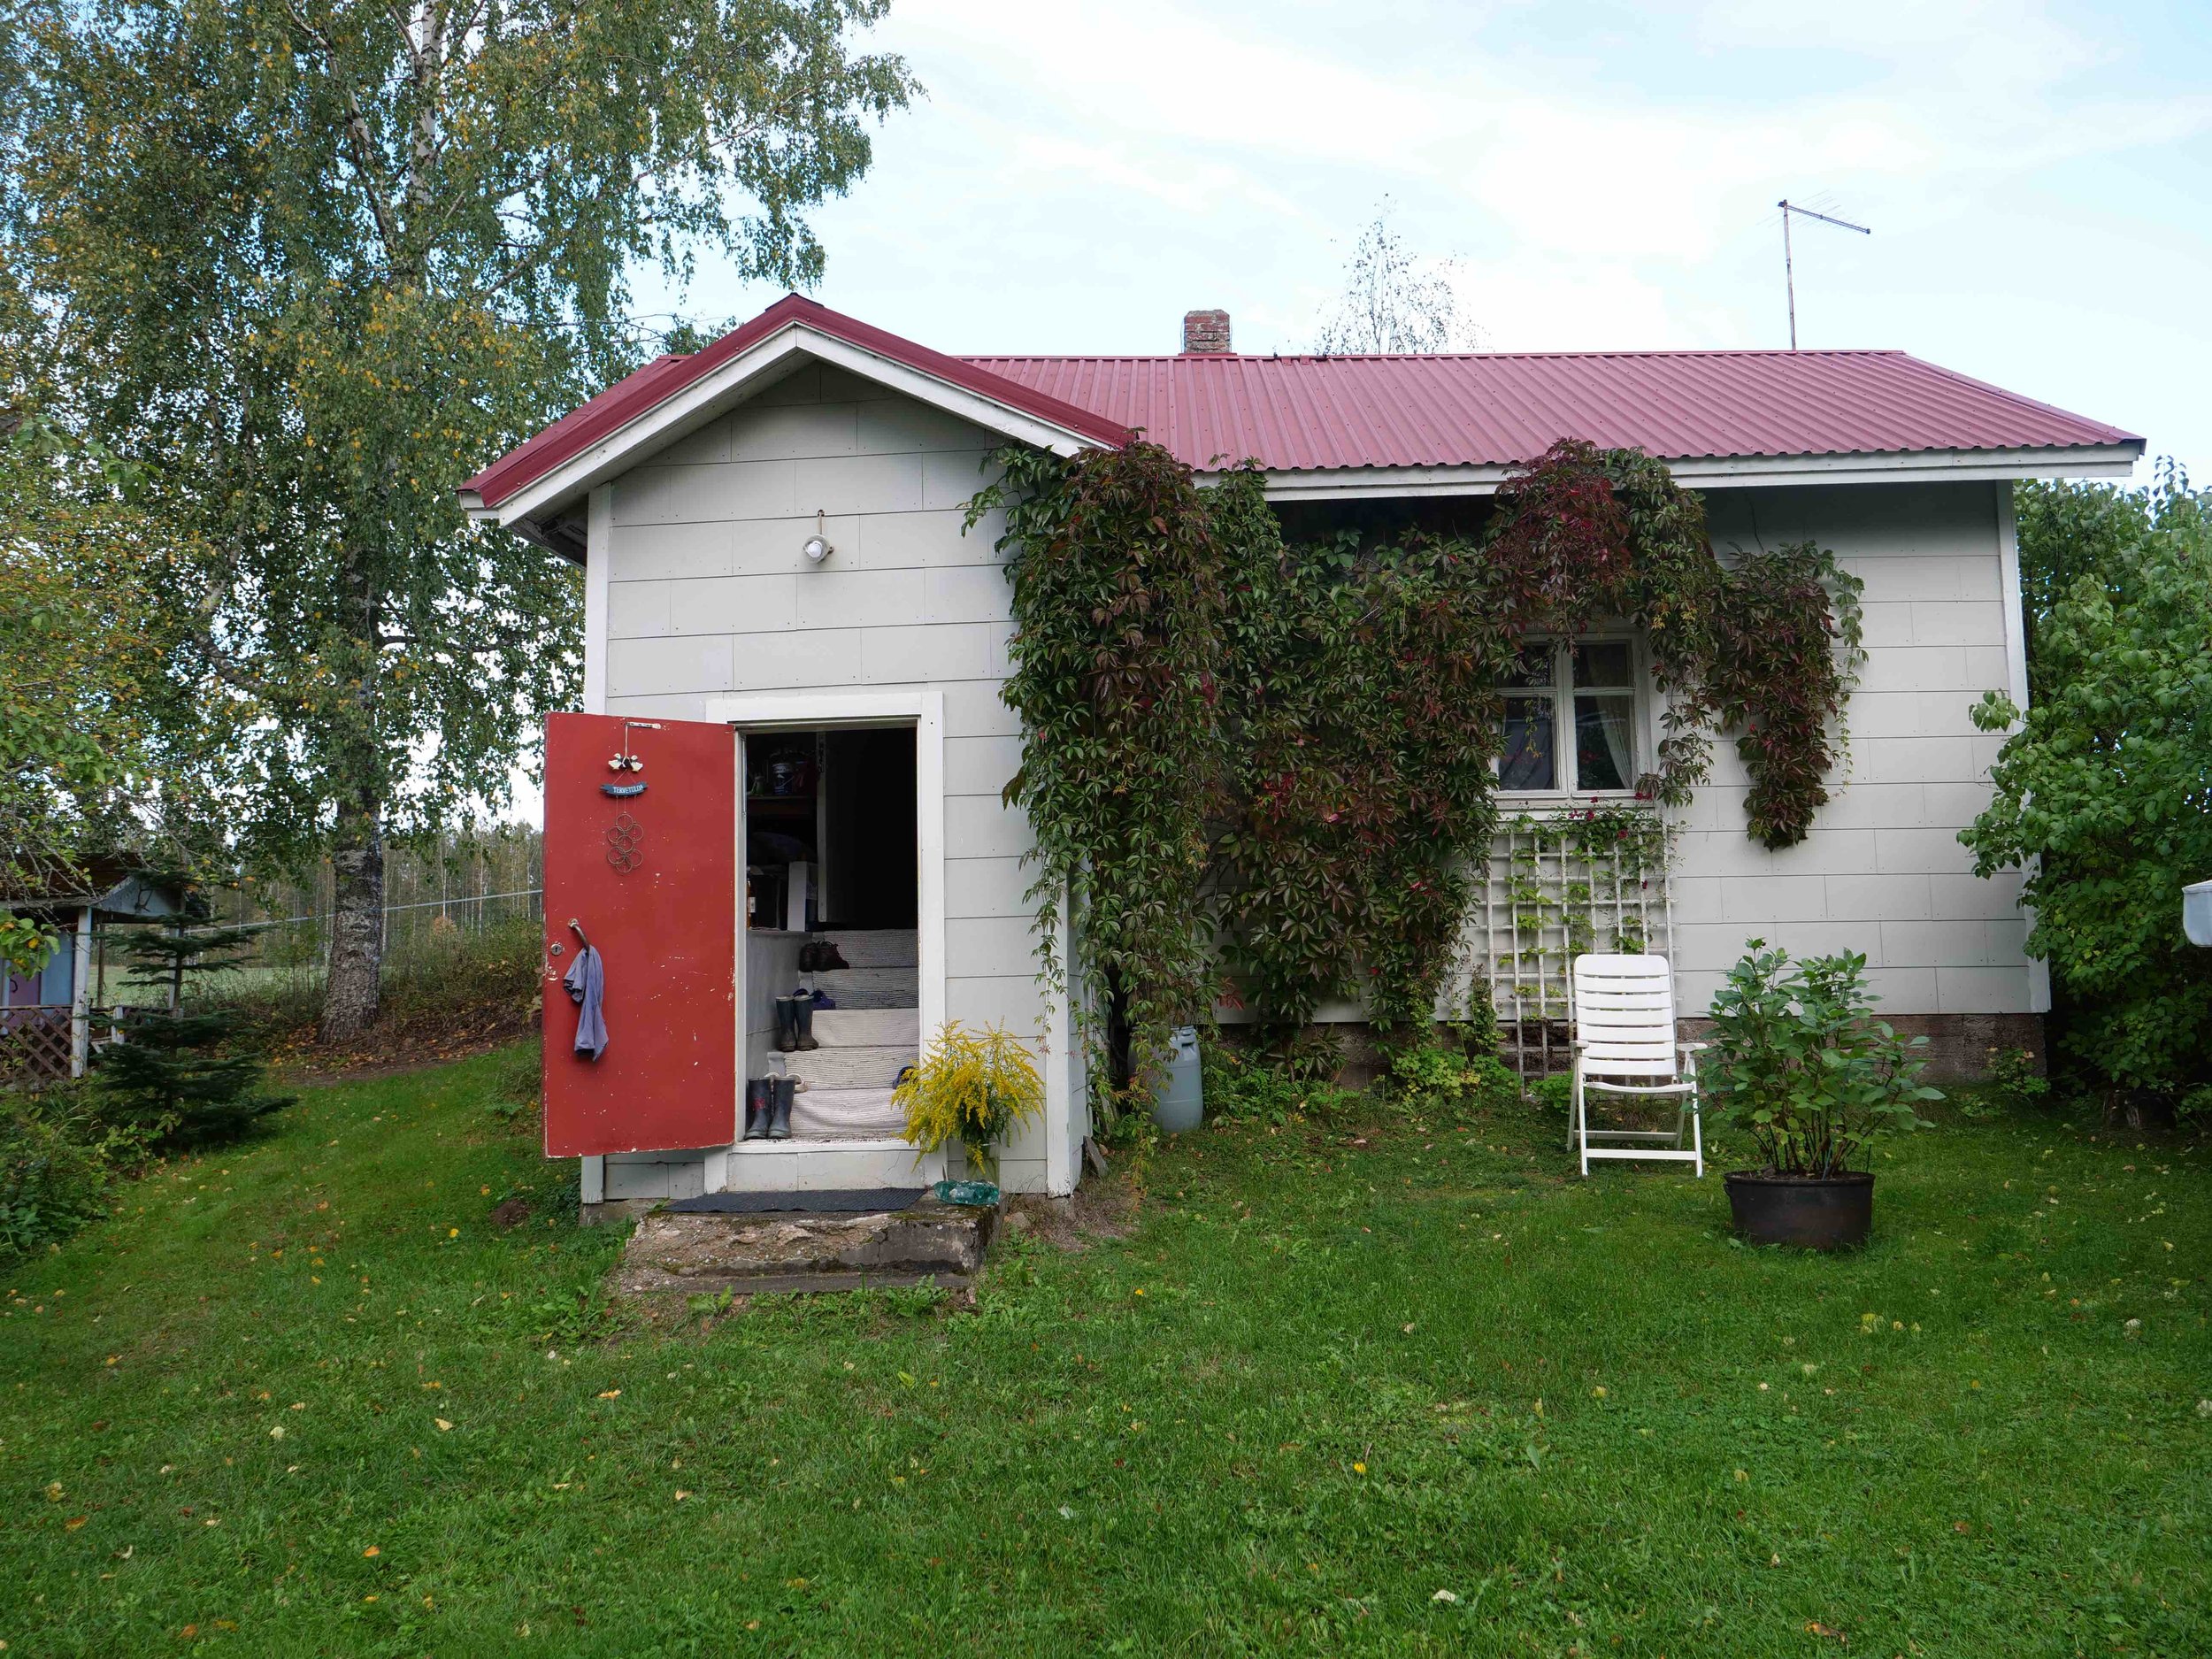  My aunt Tarja’s country cottage. 